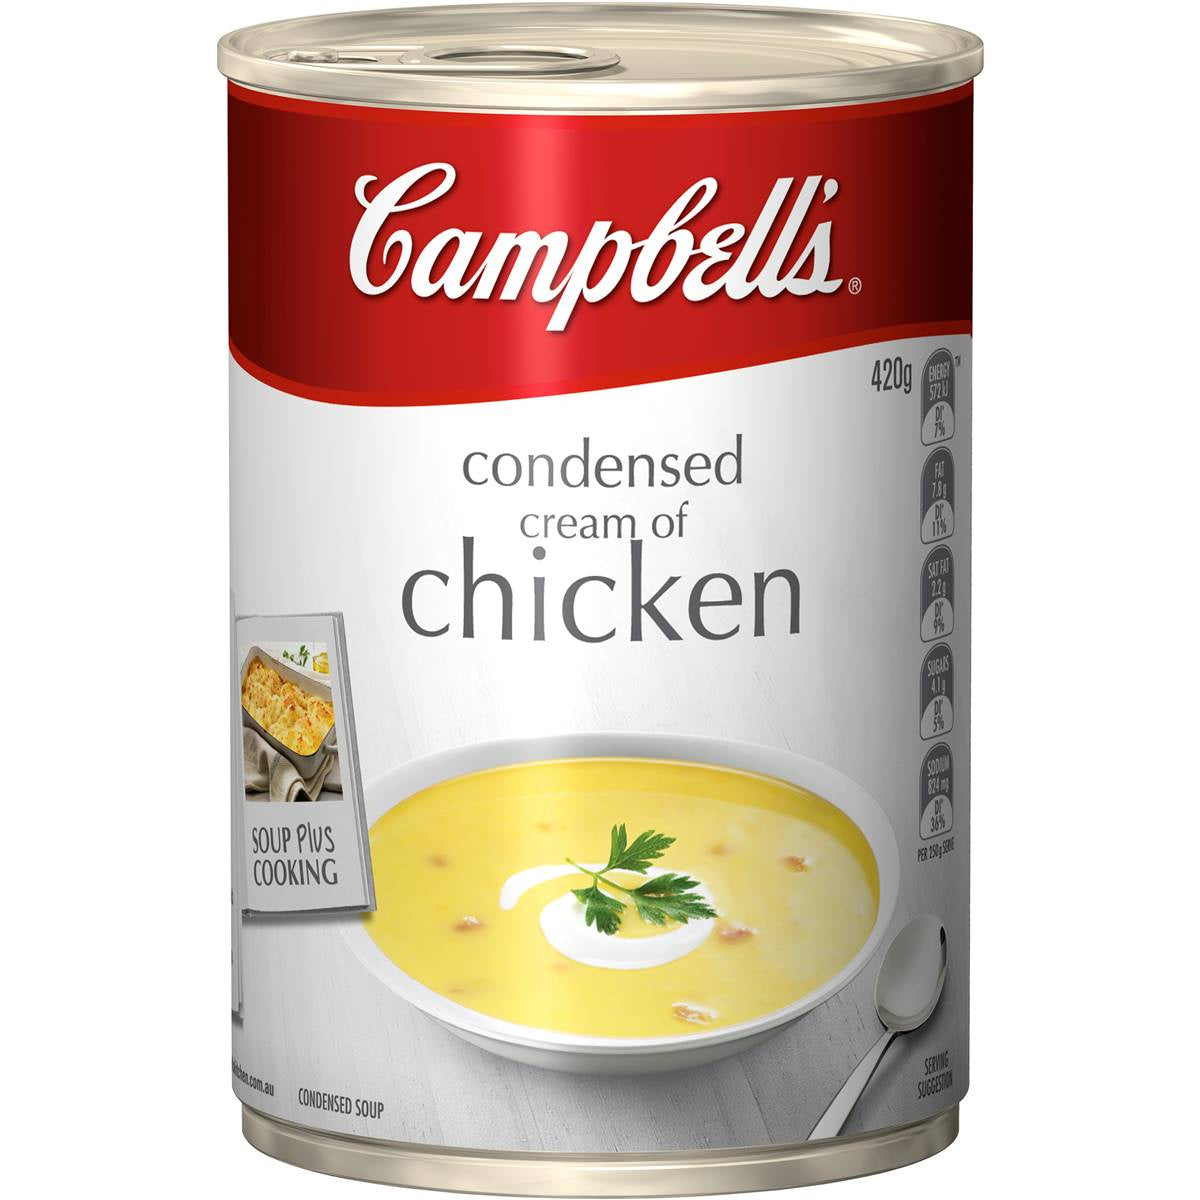 Campbells Condensed Soup Cream of Chicken 420g **